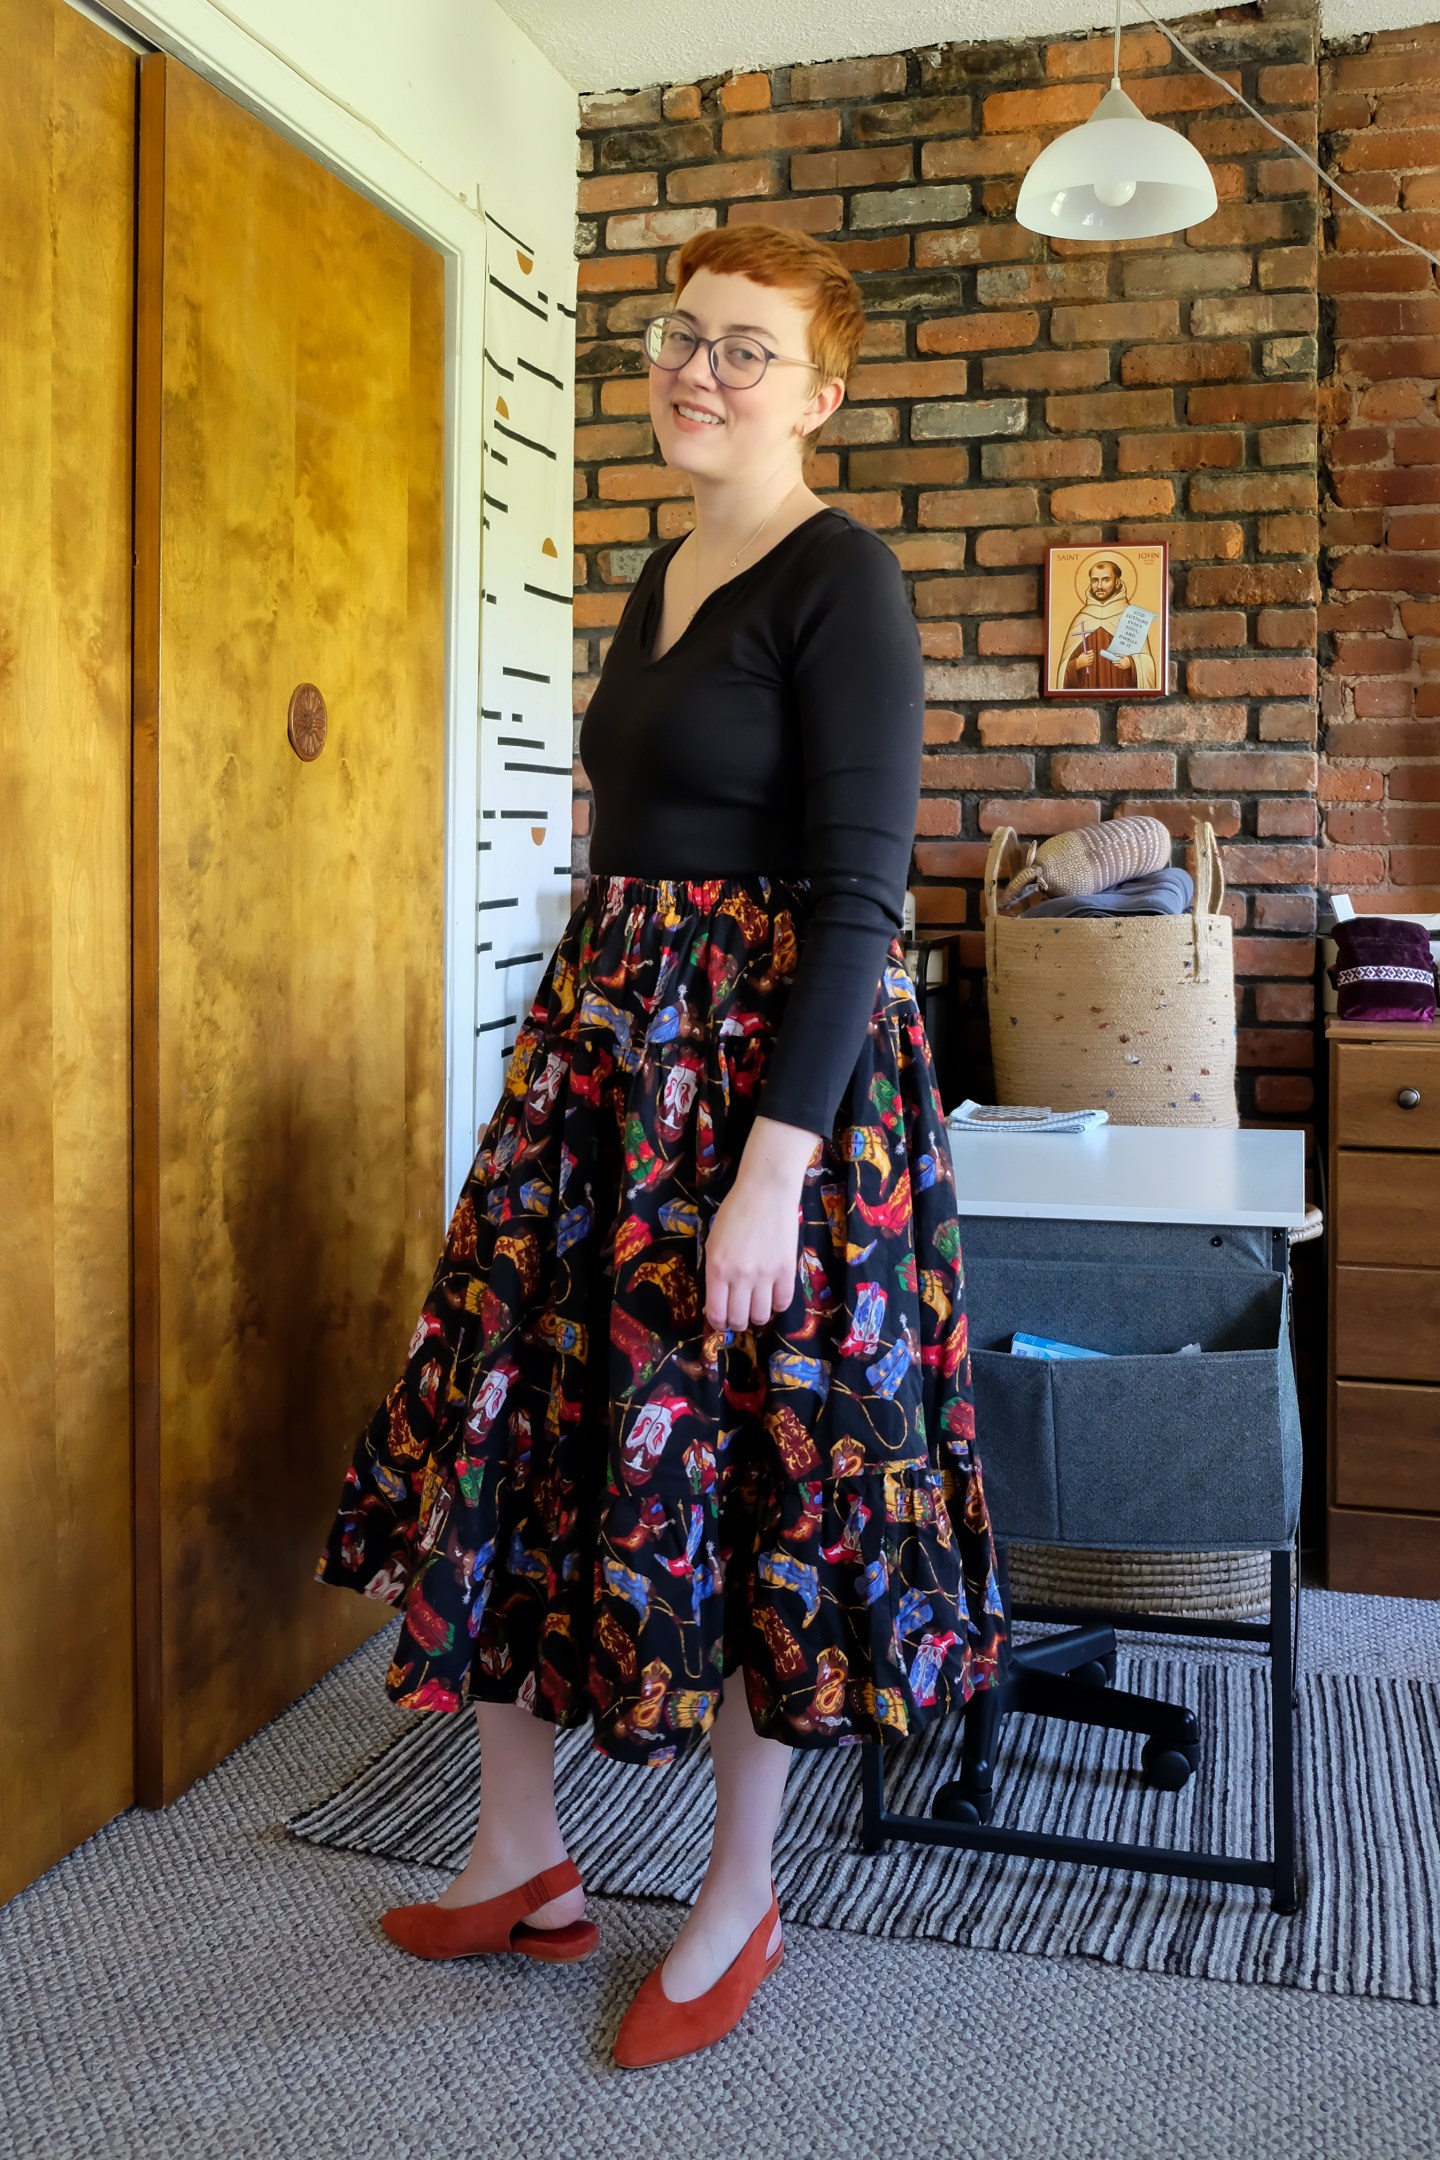 Leah wears a black top with a black circle skirt with colorful cowboy boot print, and red shoes - Big News and a Big Skirt